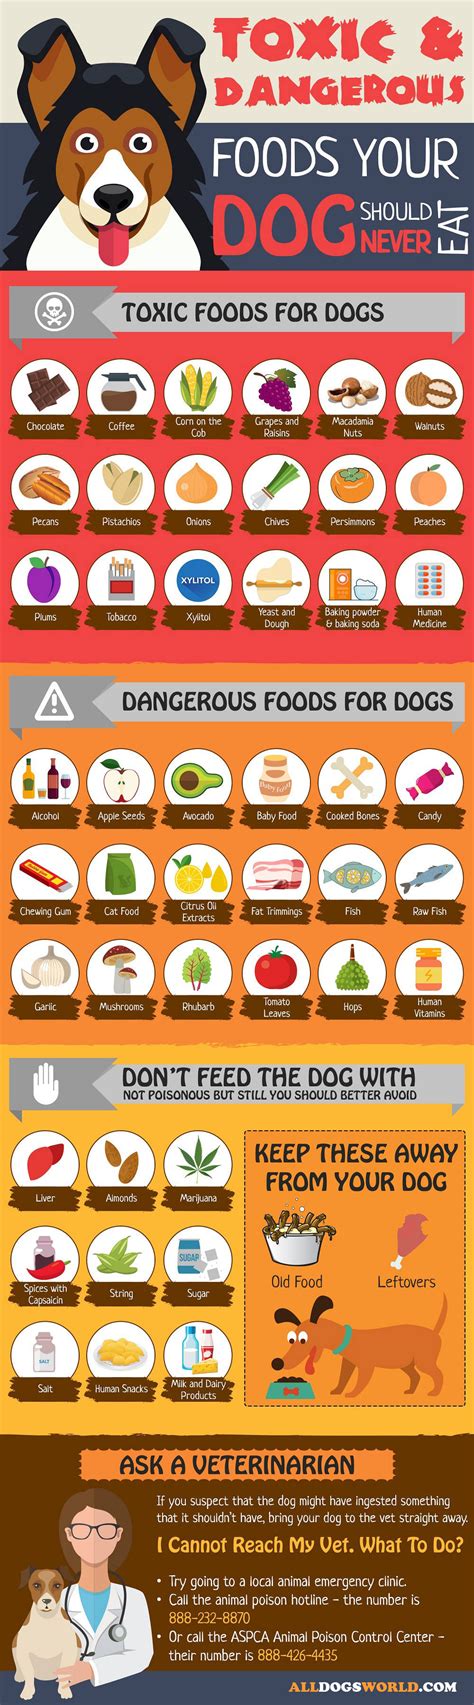  Read more Top 10 food and drink items harmful for dogs We explain the top 10 harmful food and drink items for dogs, and what to do if you think your dog has eaten one of them